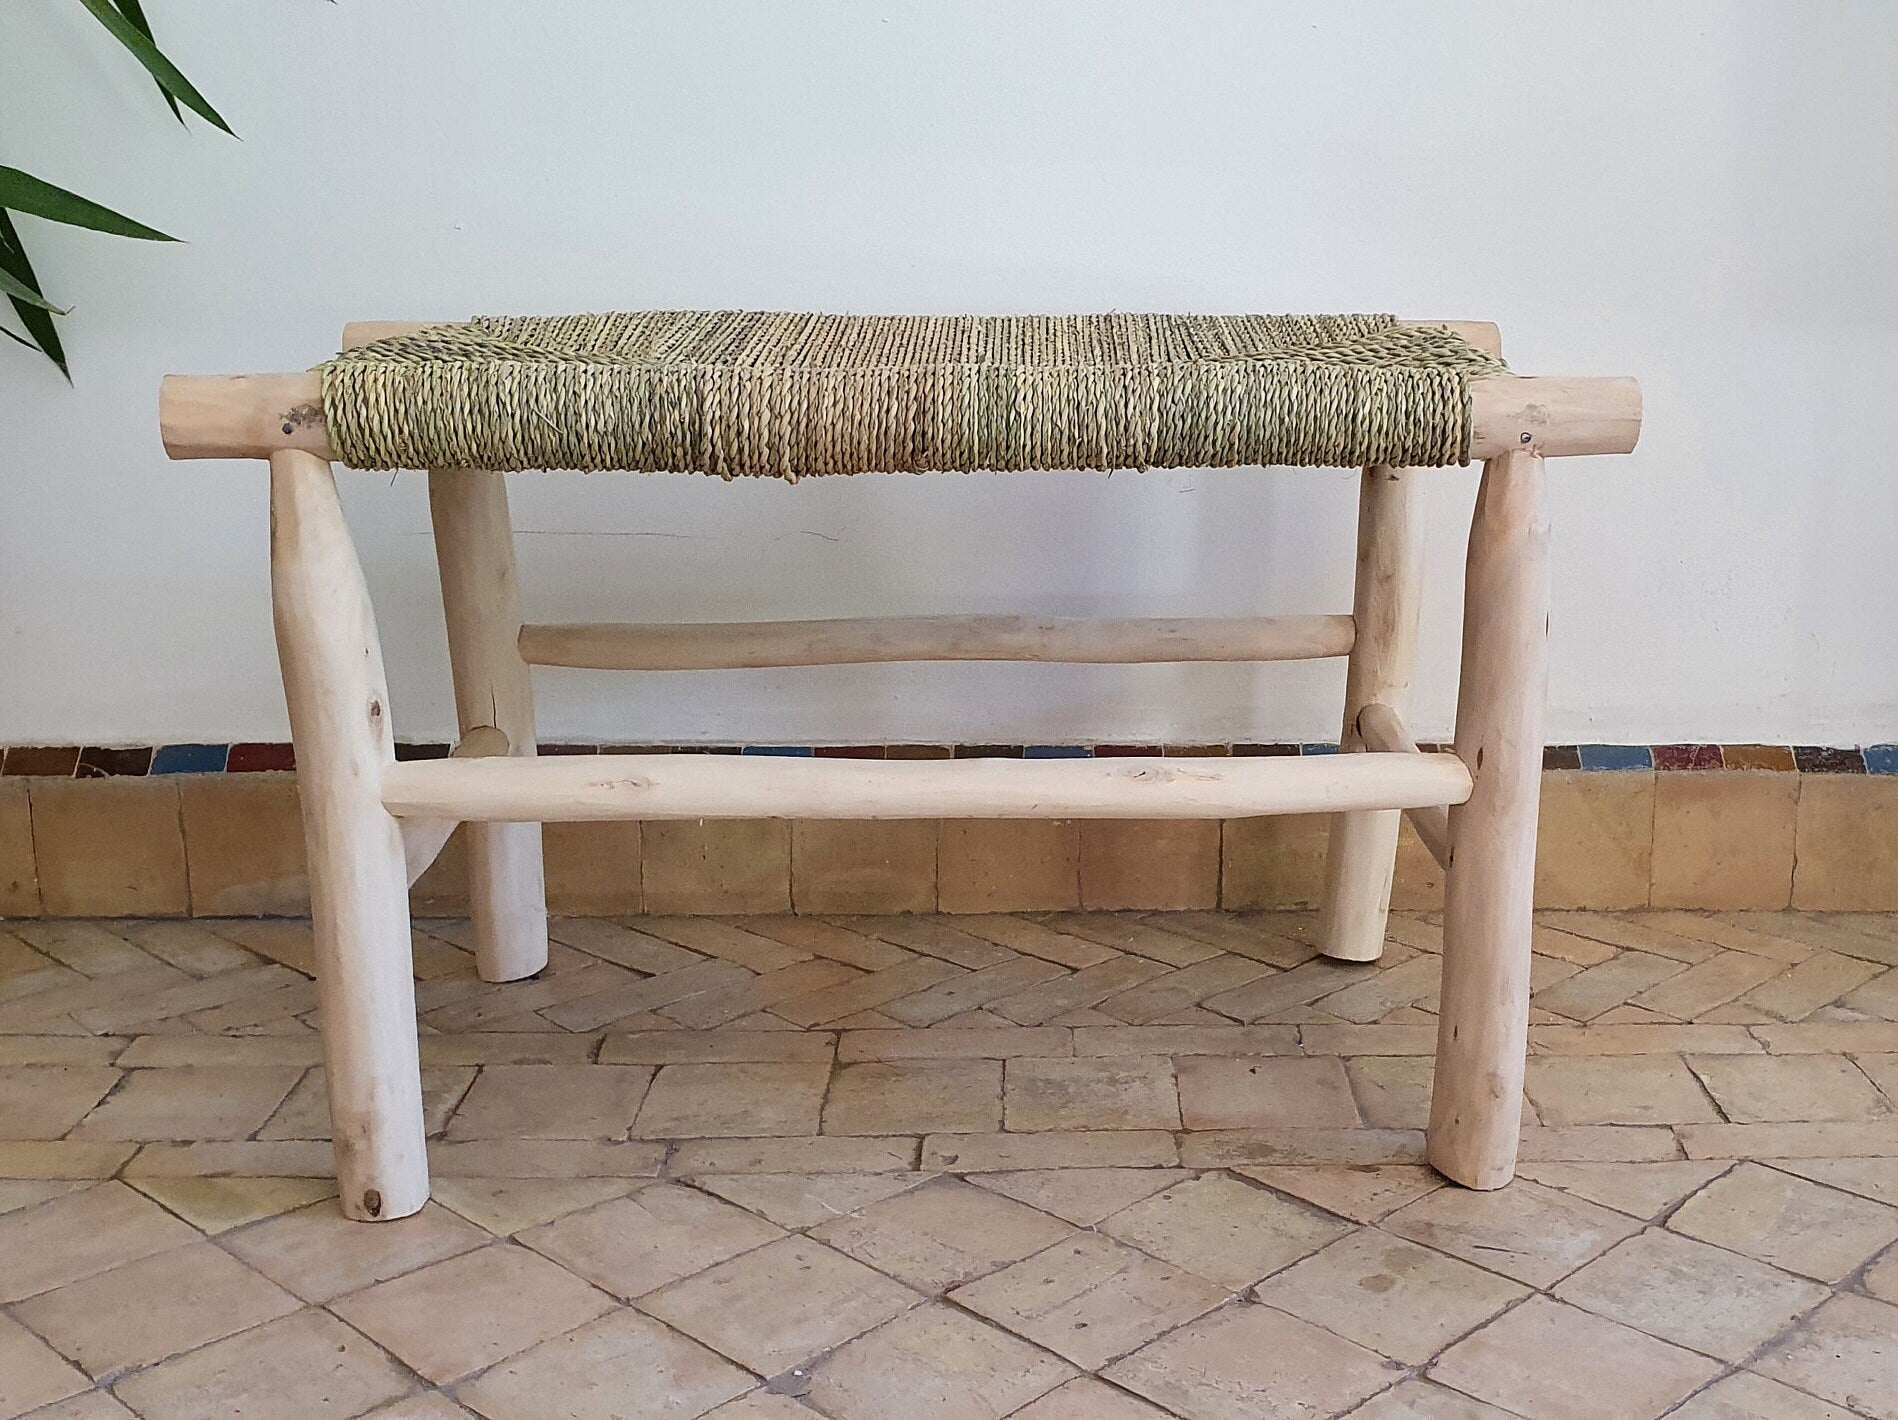 Artisanal Moroccan bench made from solid wood and woven detailing